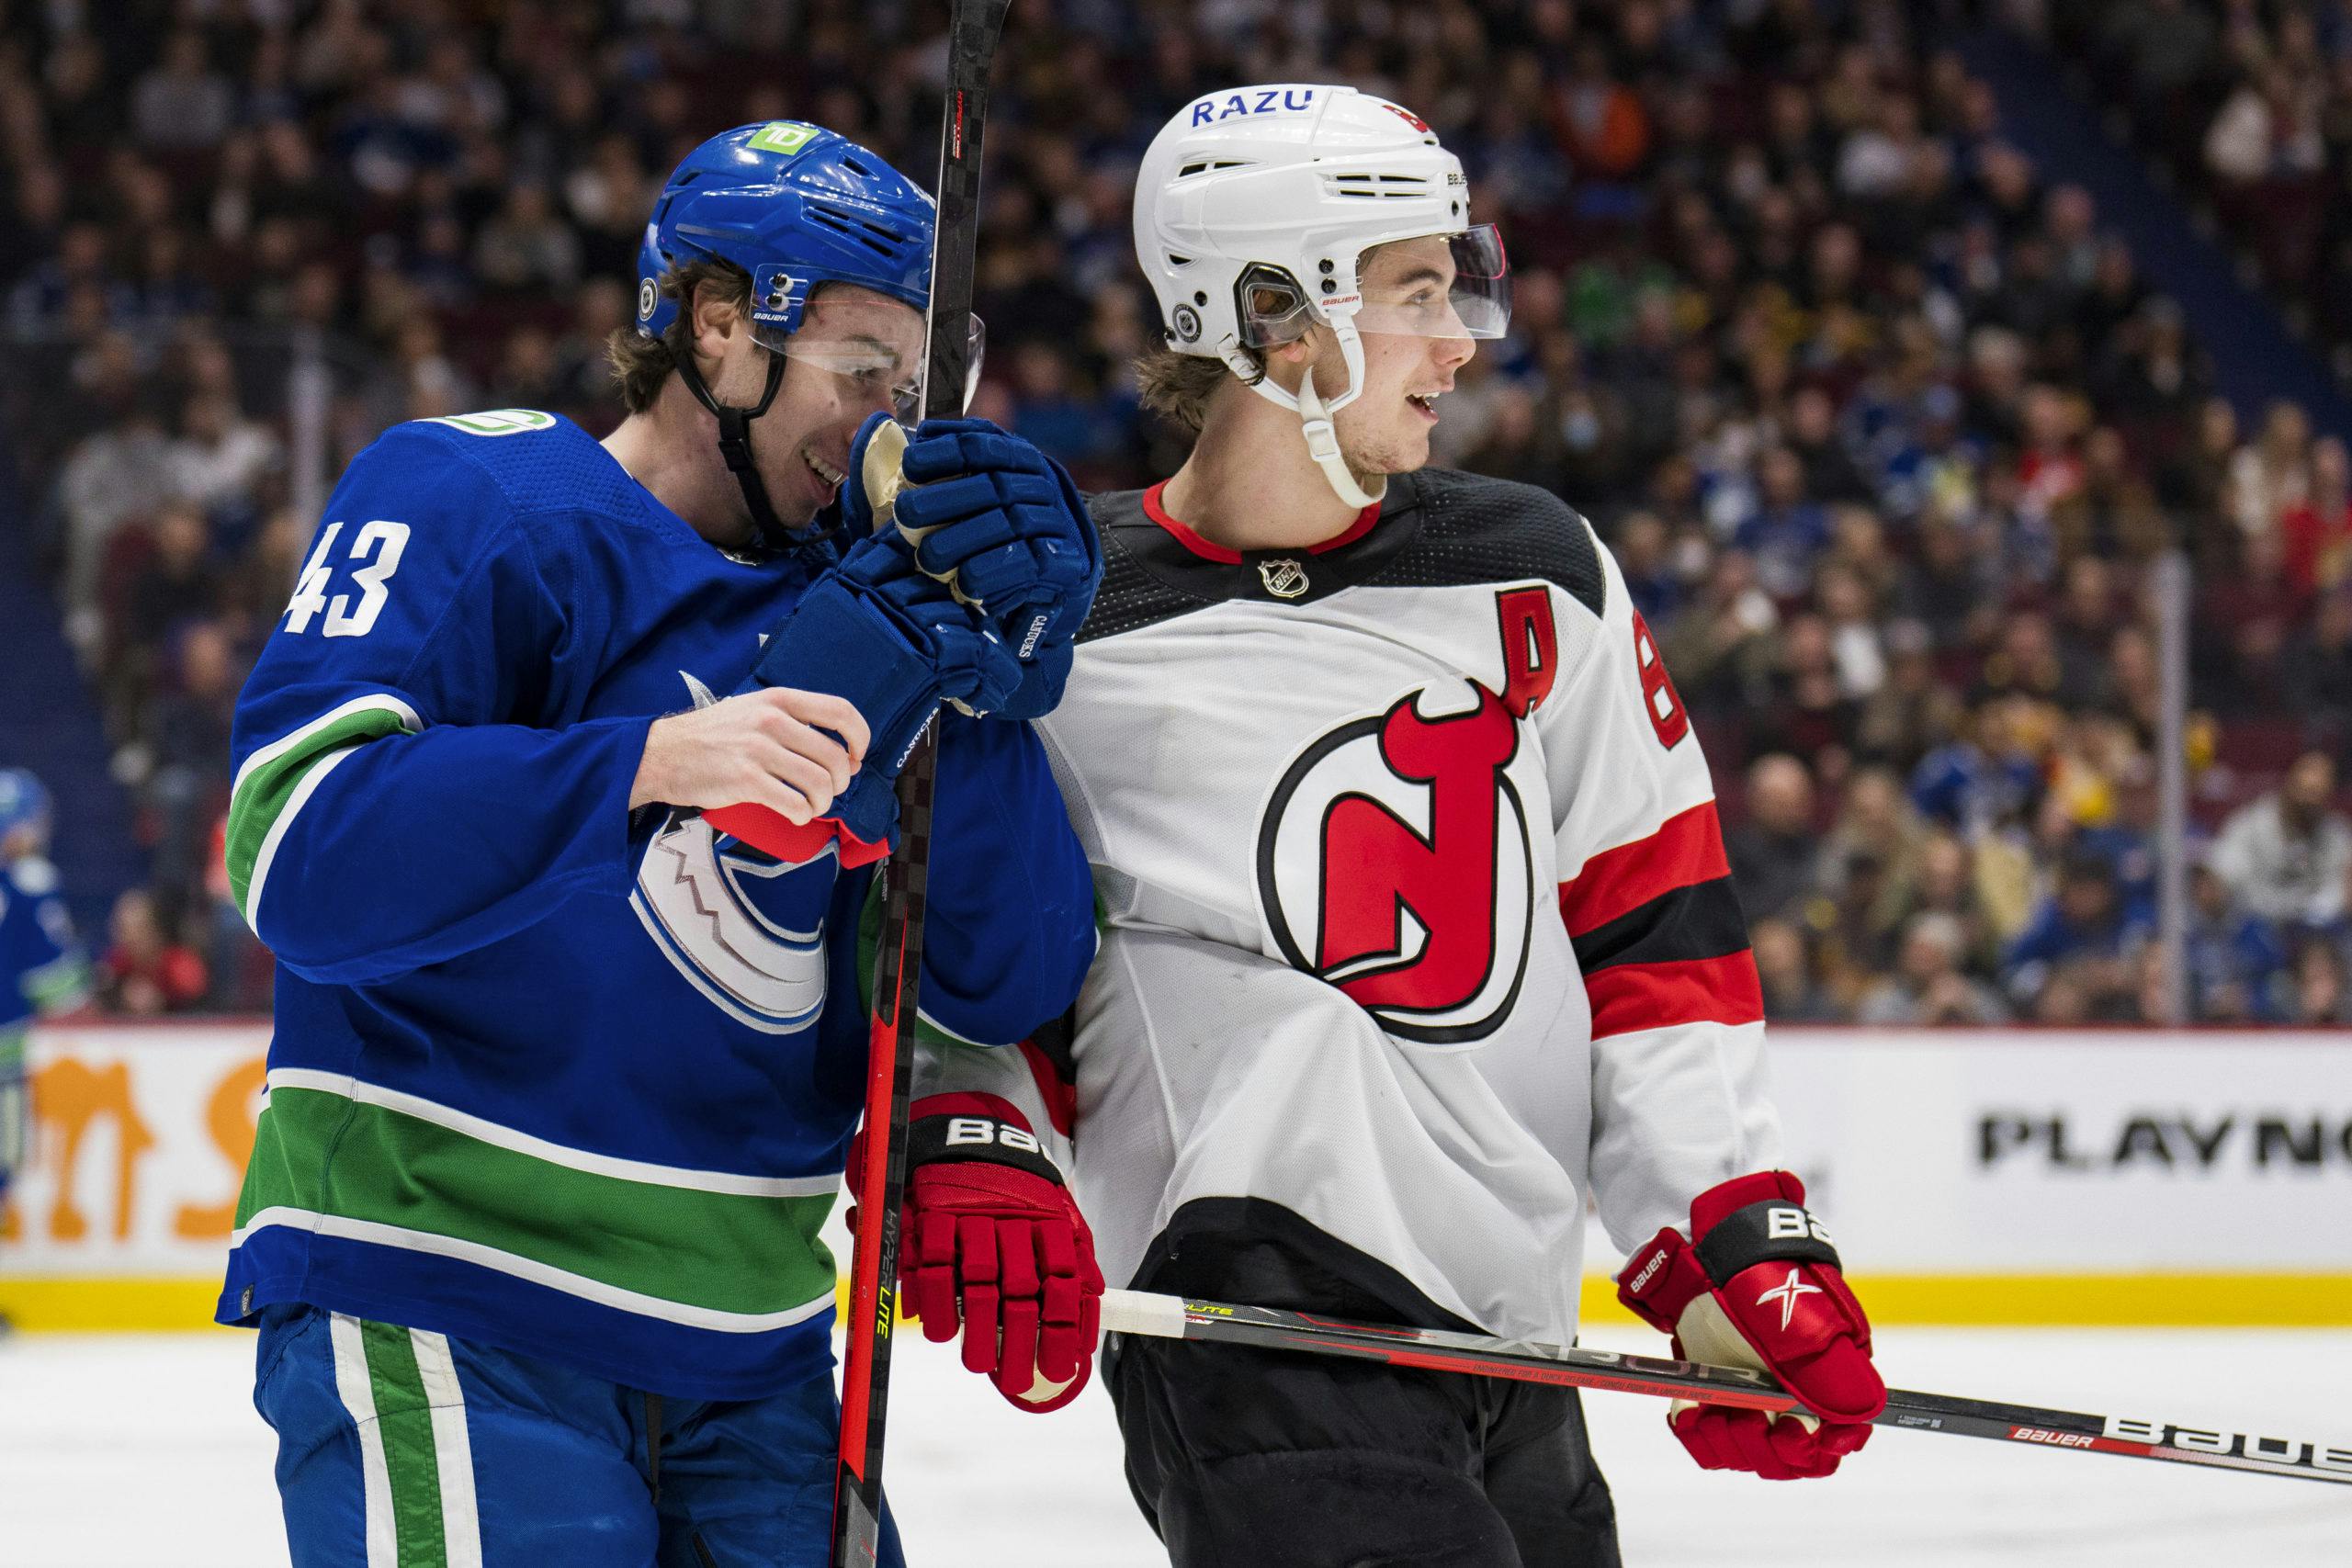 New Jersey Devils vs. Vancouver Canucks odds, tips and betting trends